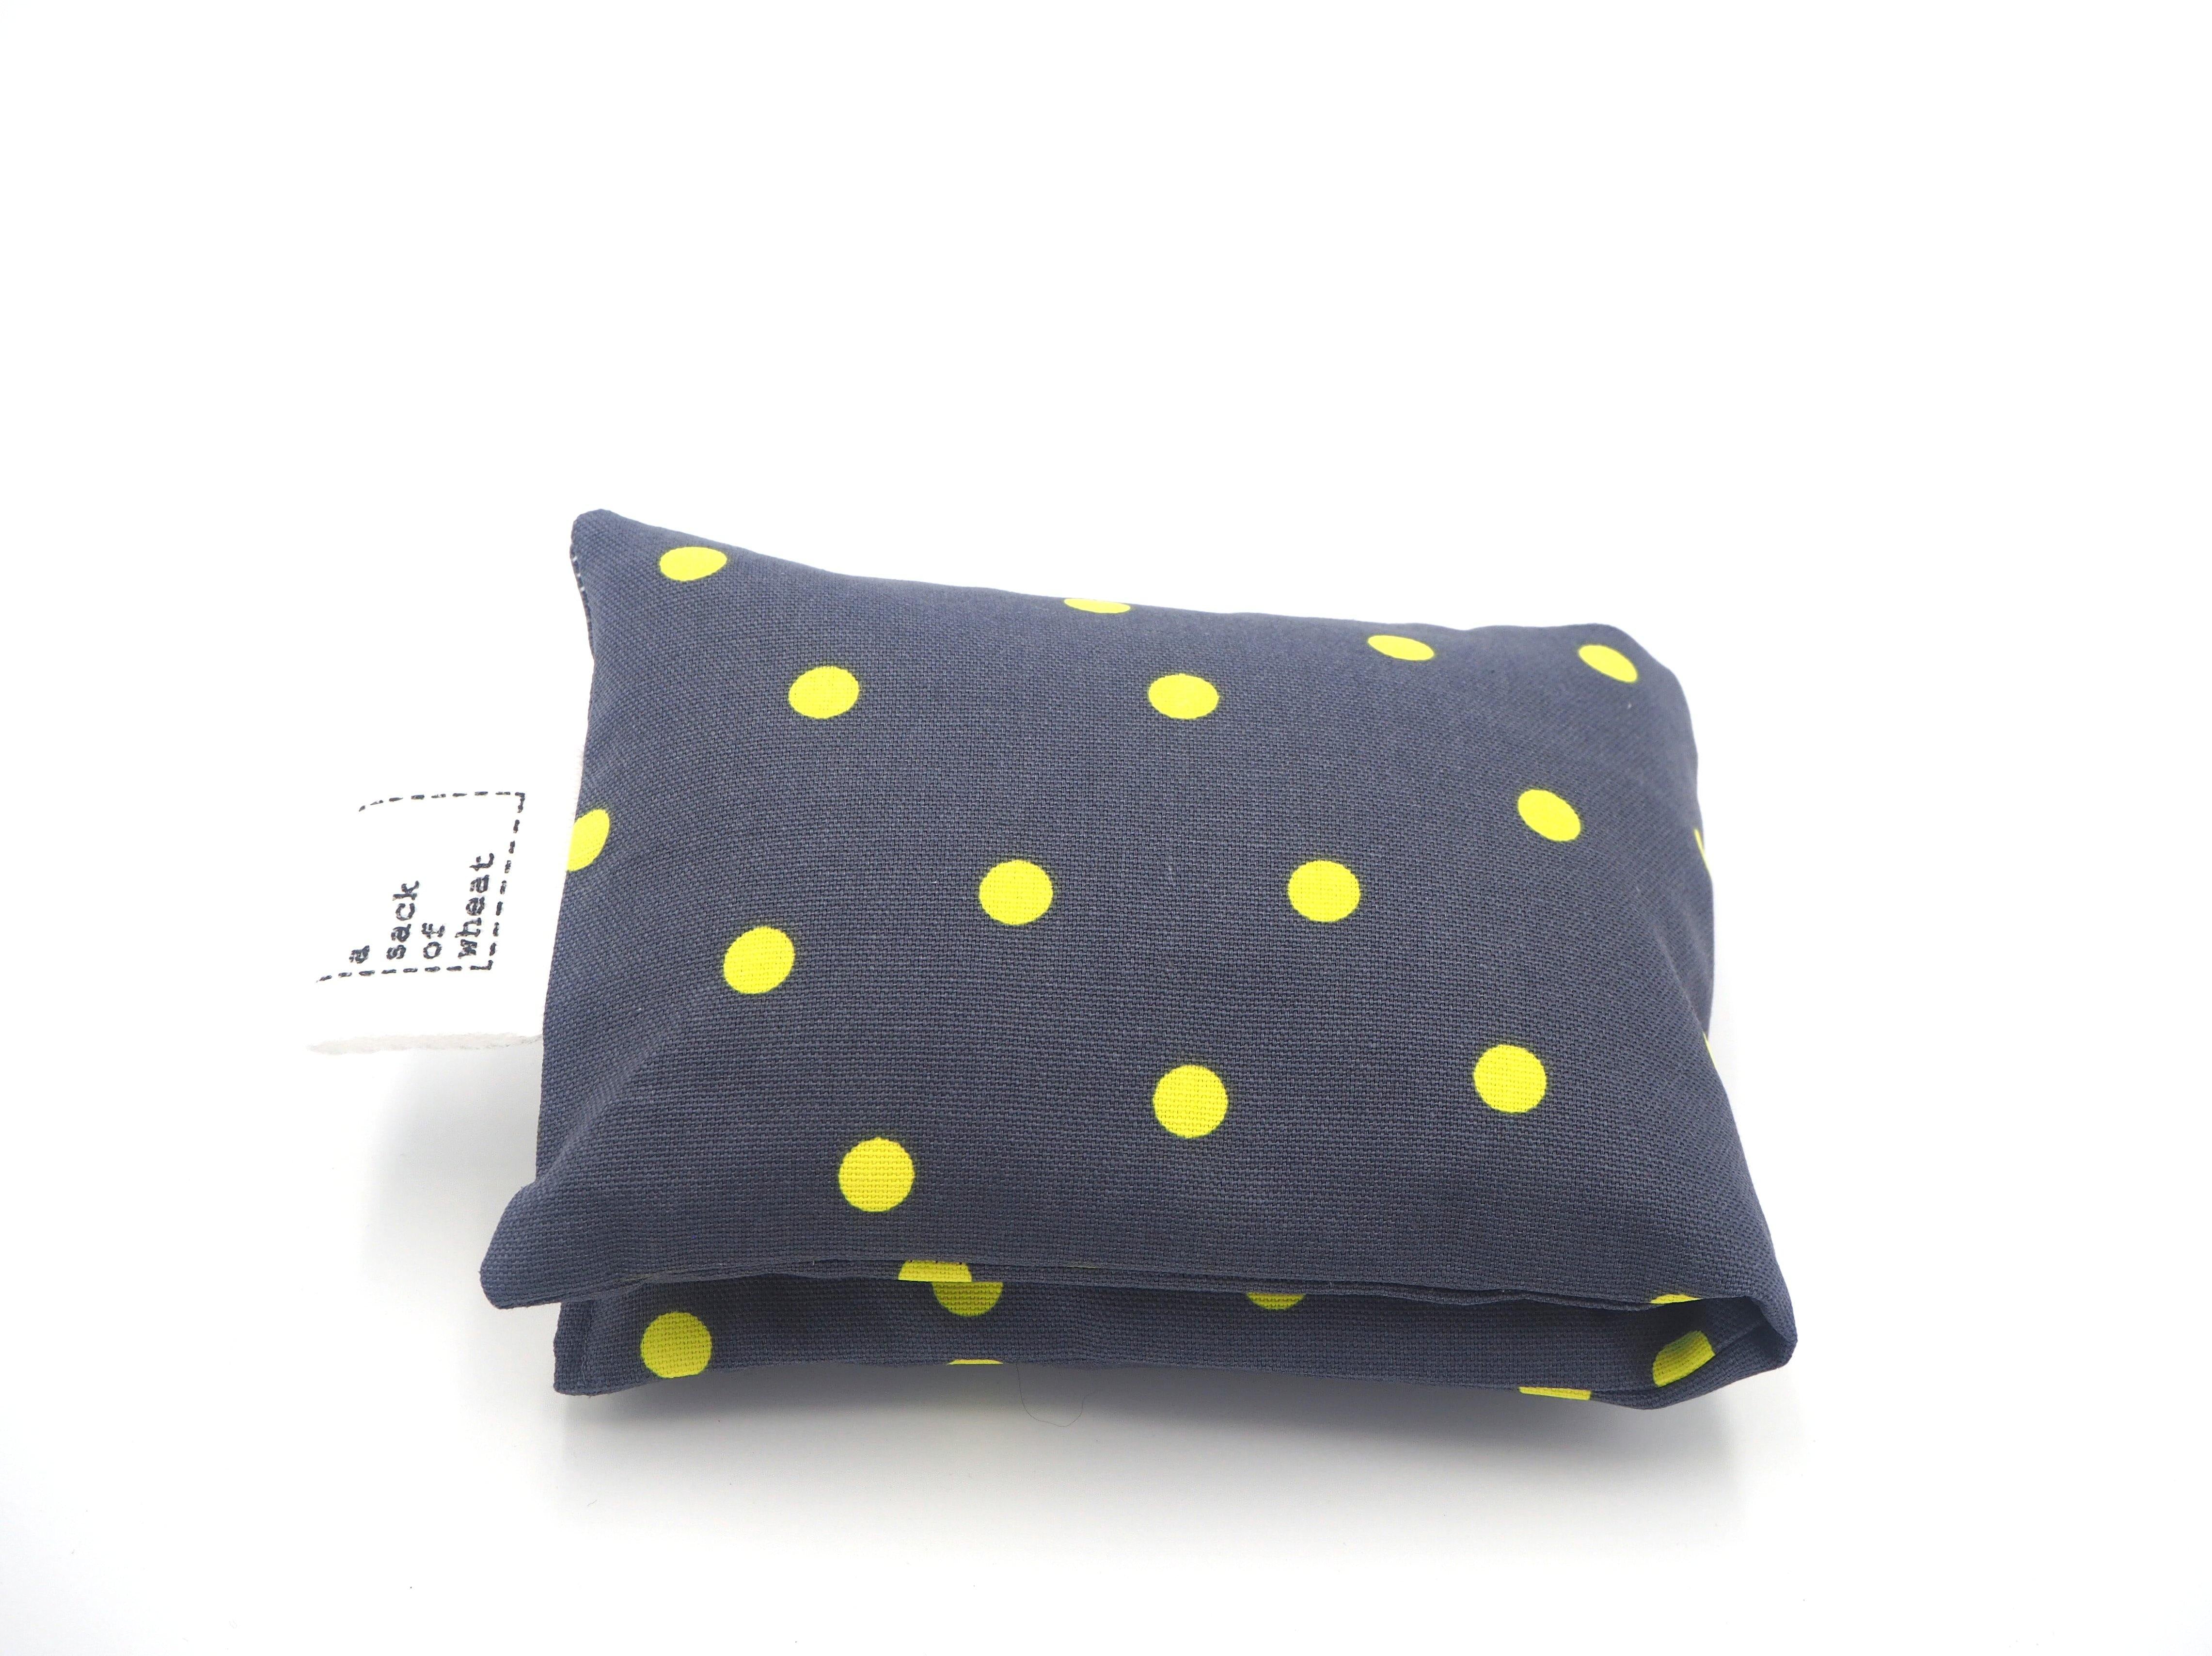 Folded view of A Sack Of Wheat, featuring Fluro yellow spots on Charcoal Grey background print, 100% cotton fabric